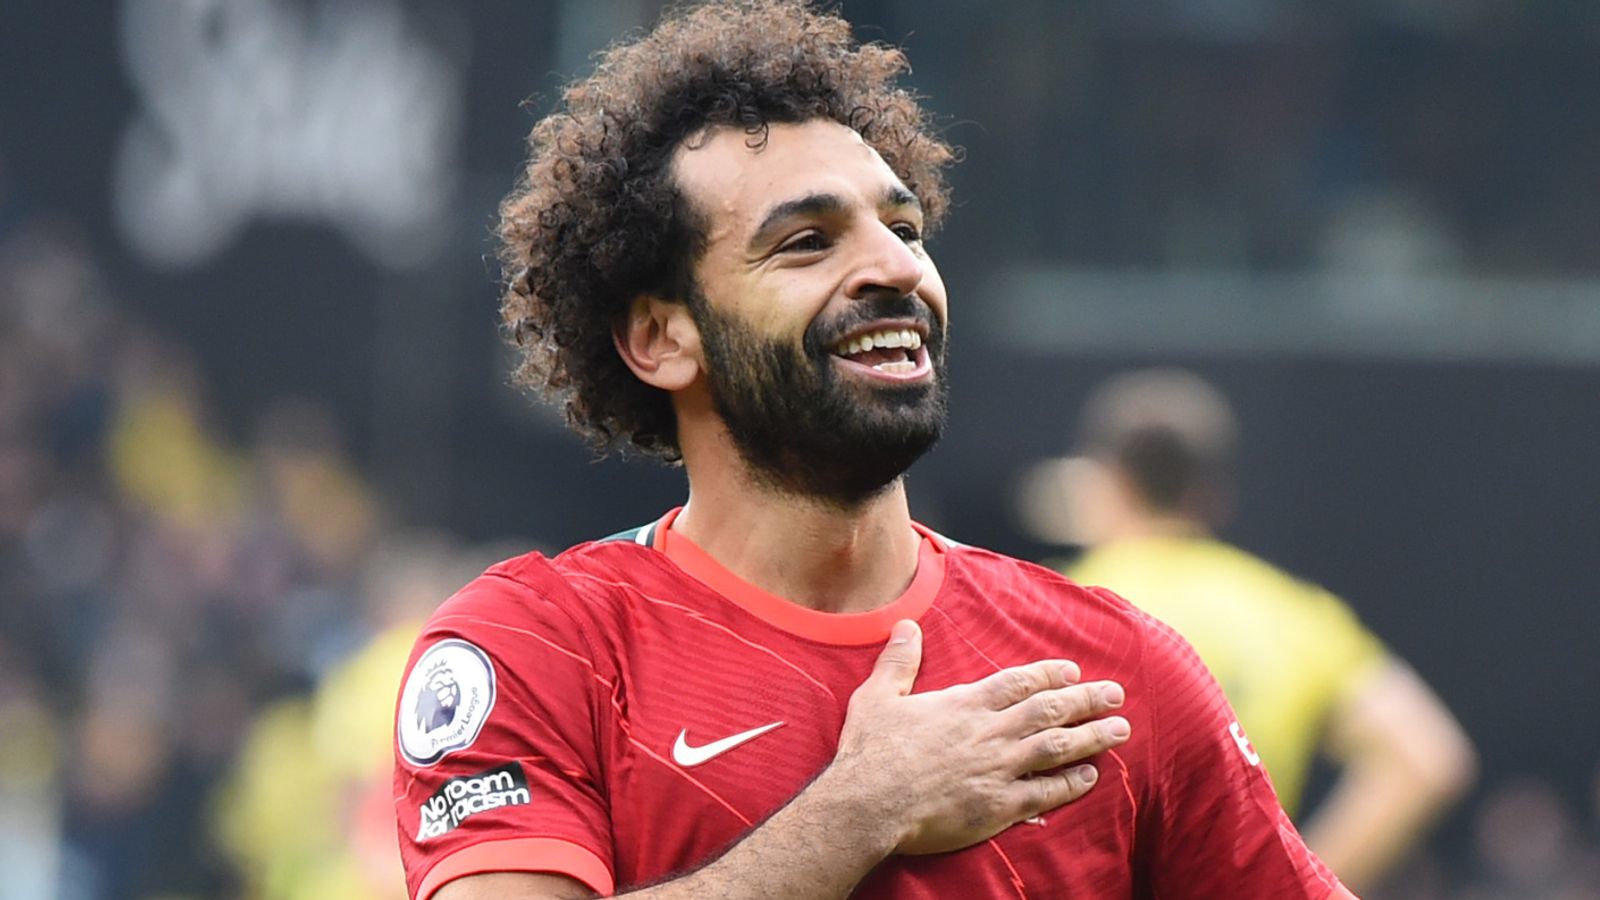 Mohamed Salah | Liverpool manager Jurgen Klopp is tension fre about forward's contract negotiations